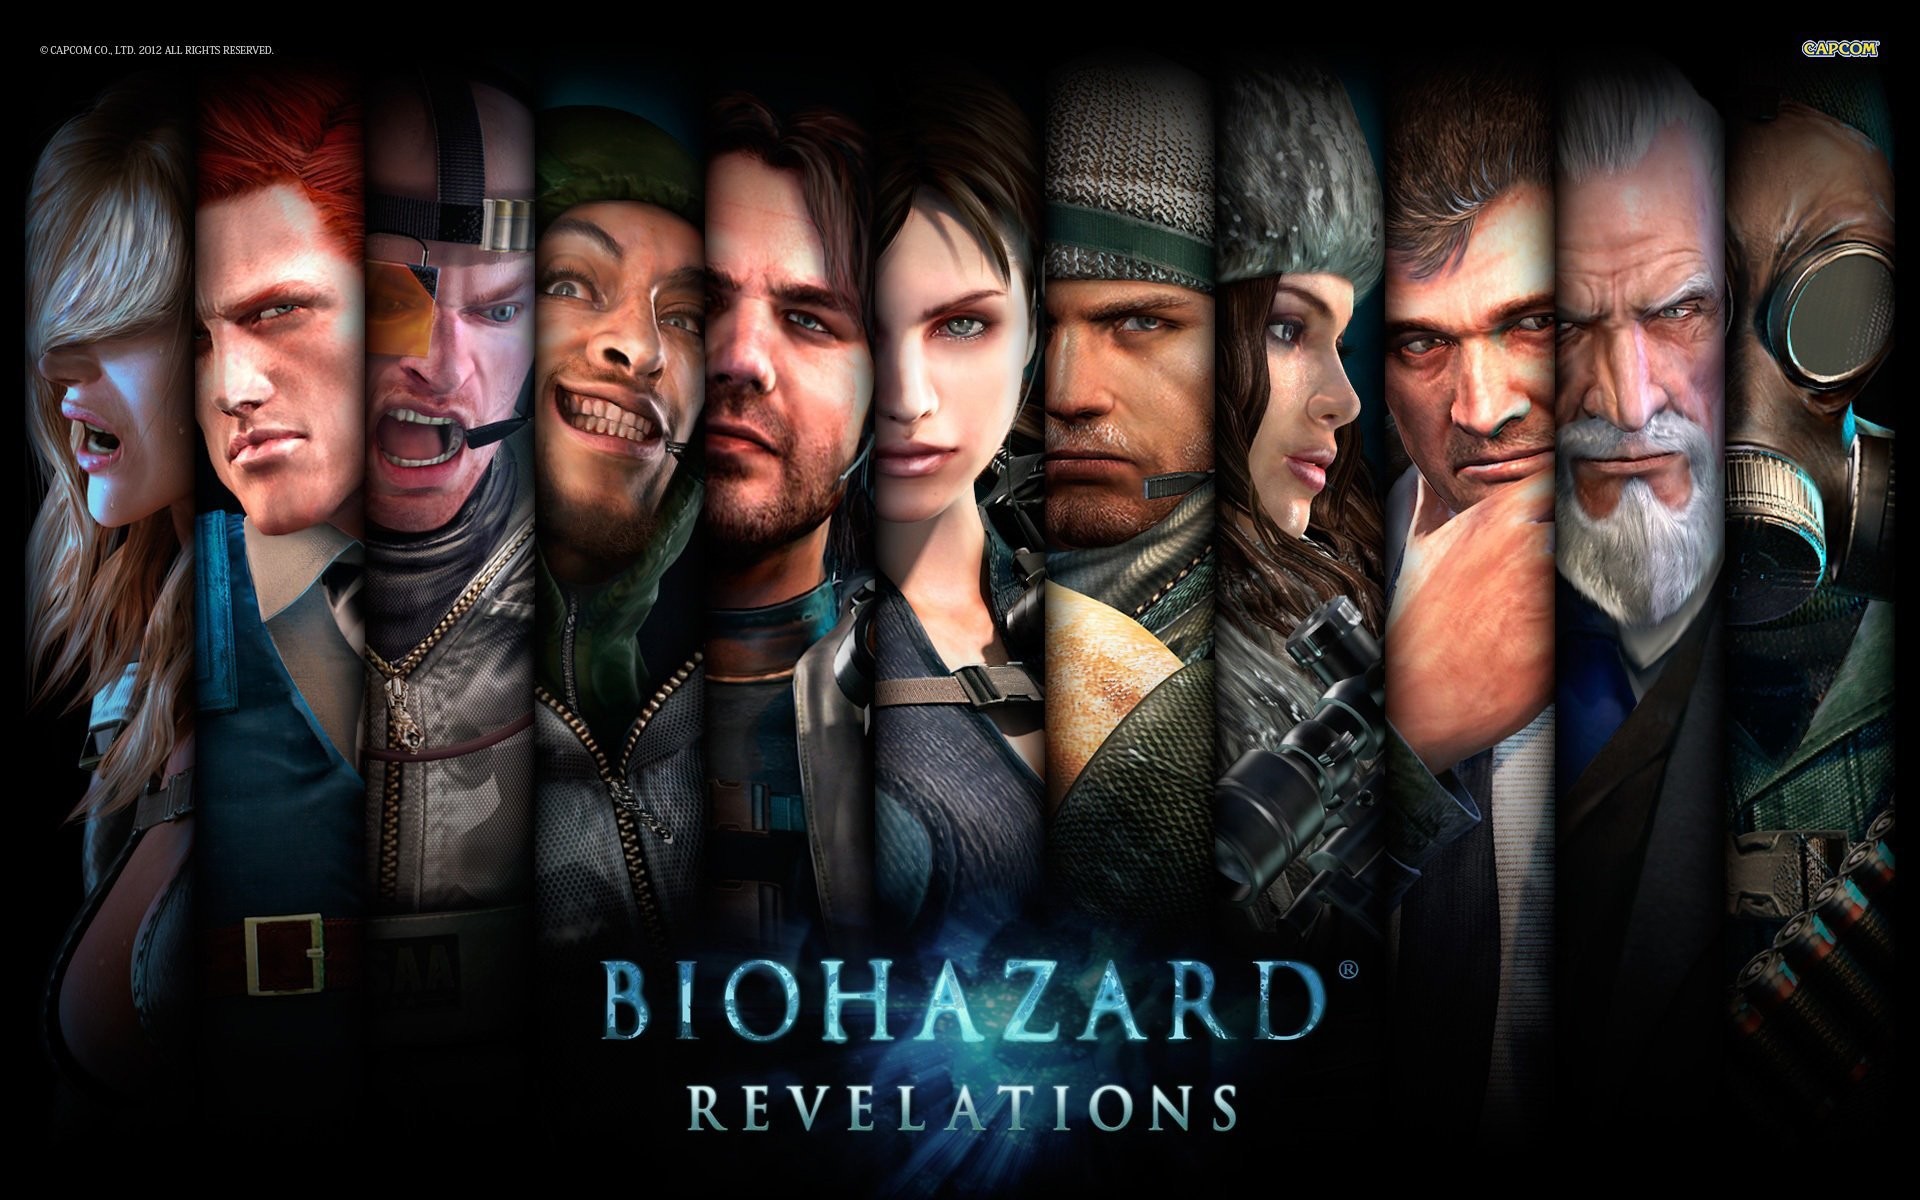 resident evil: revelations characters characters resident evil :  revelations jill valentine jill valentine parker luciani